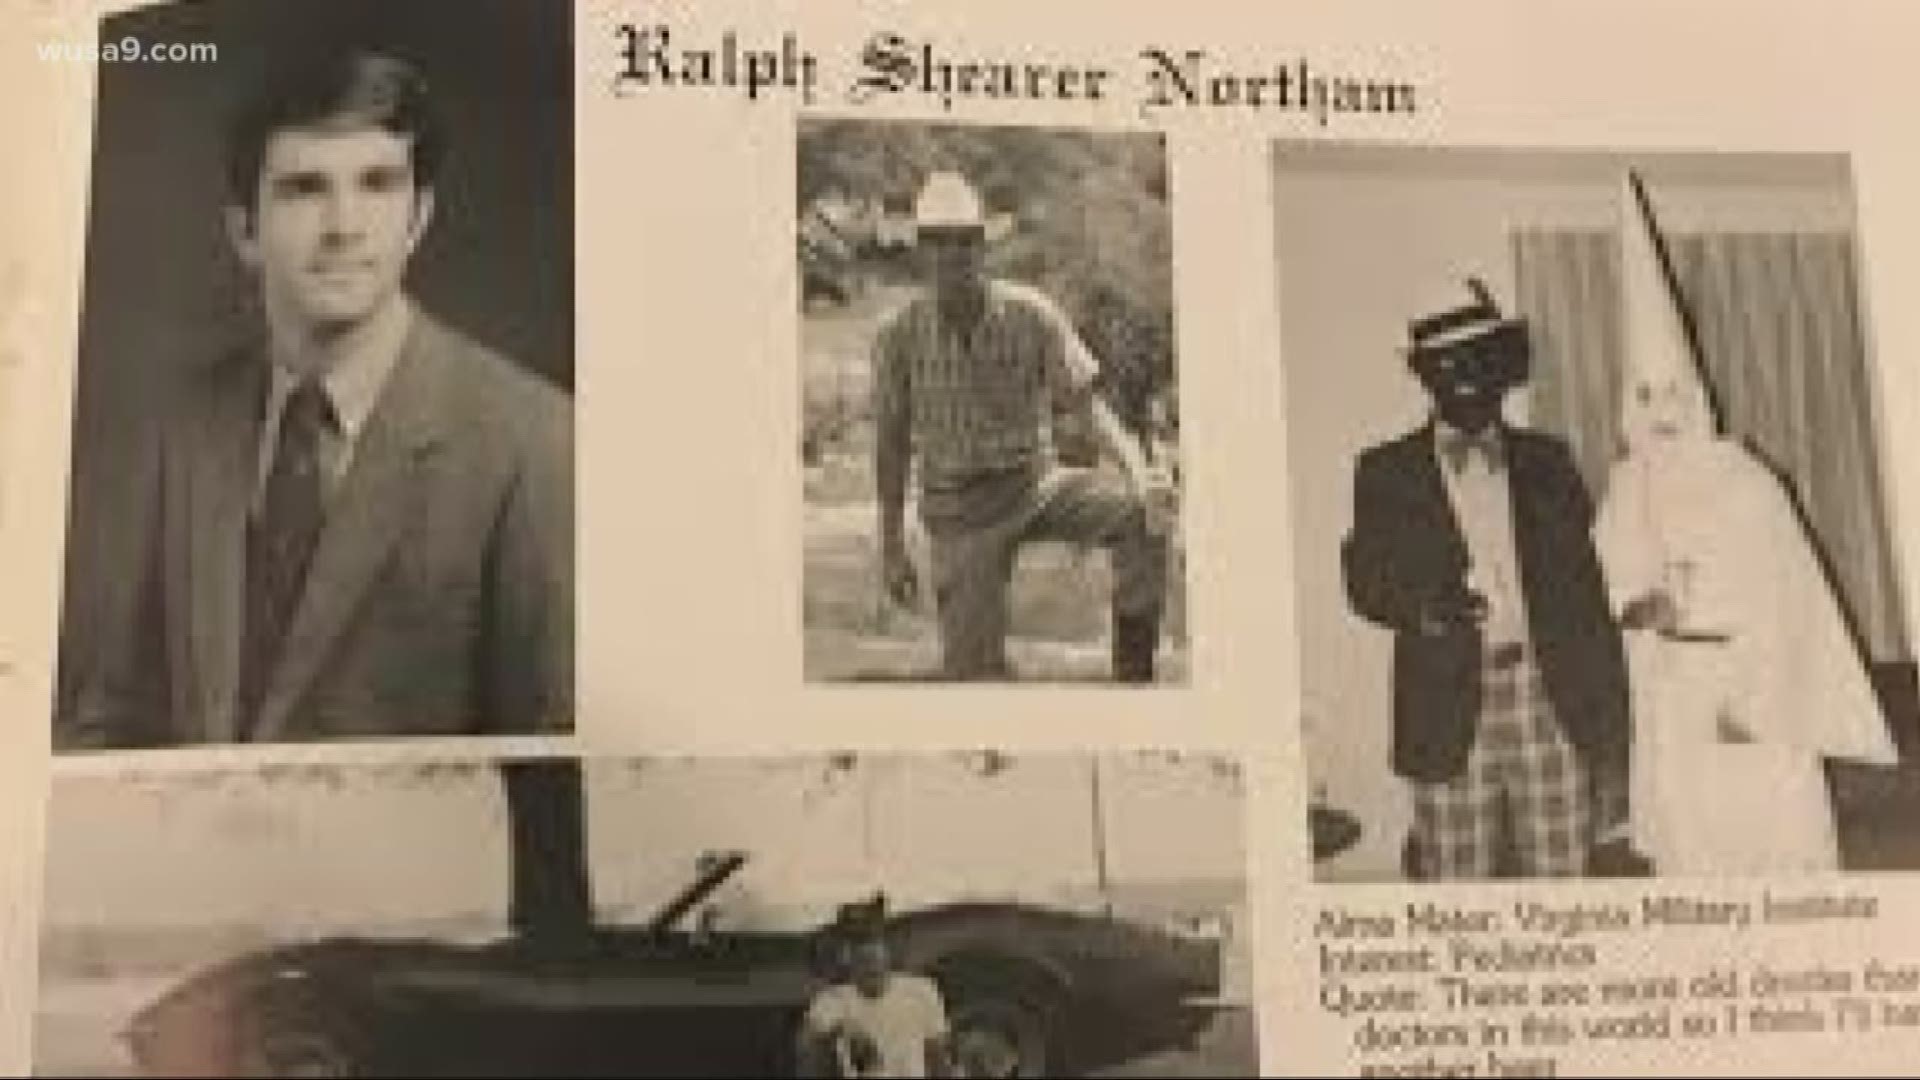 Va. Gov. Northam resists calls to resign after racist photo found on his 1984 yearbook page.